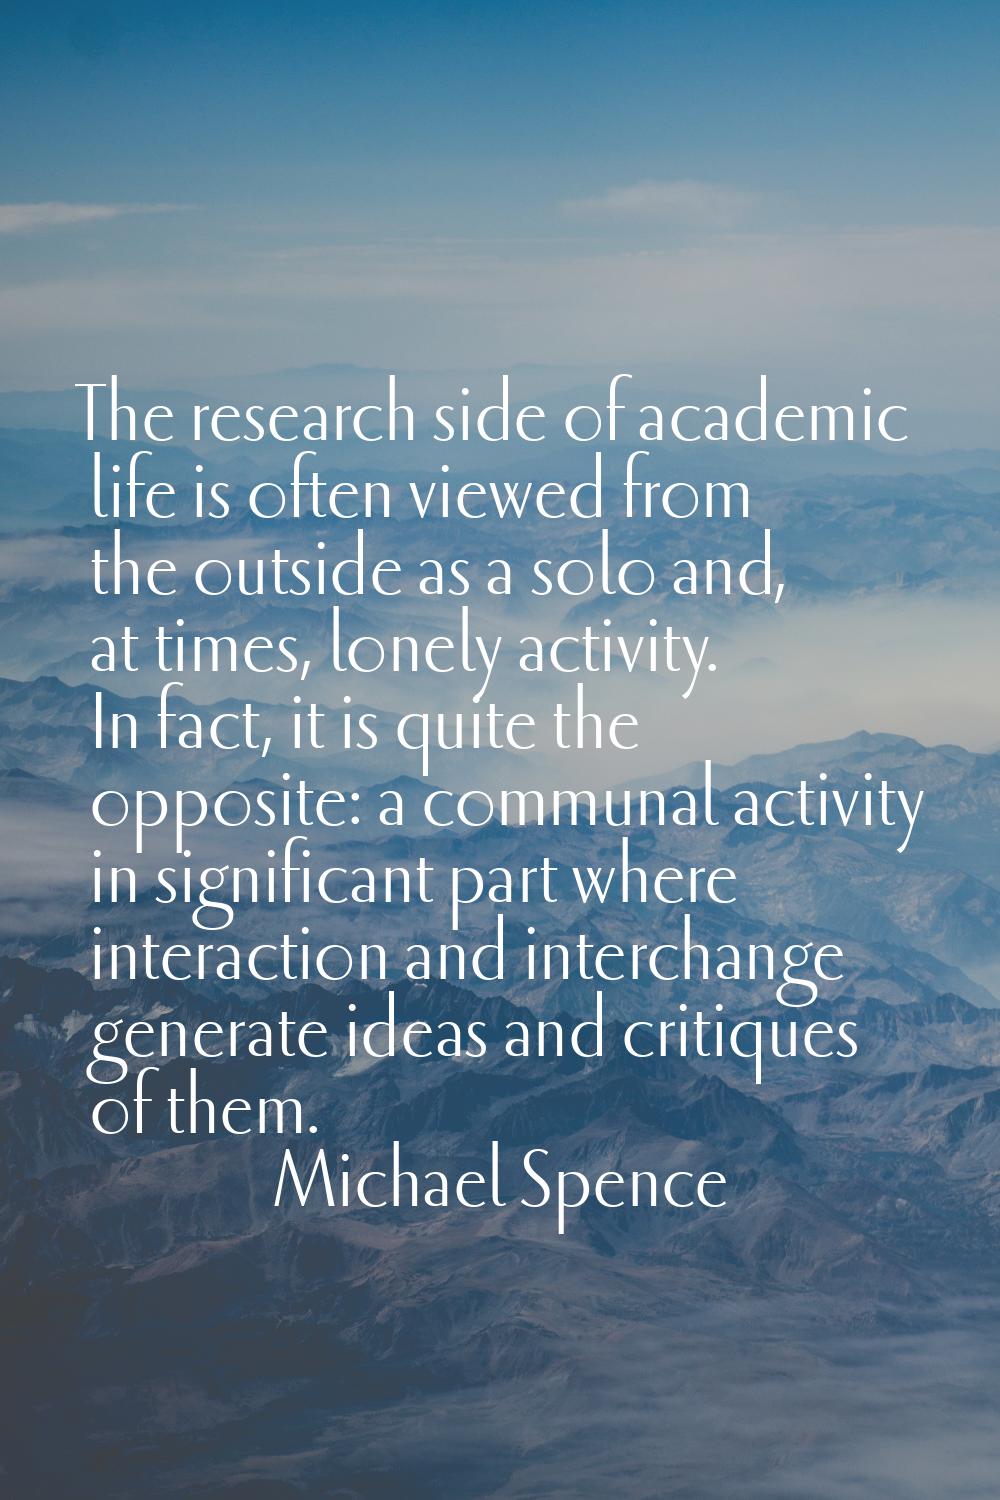 The research side of academic life is often viewed from the outside as a solo and, at times, lonely